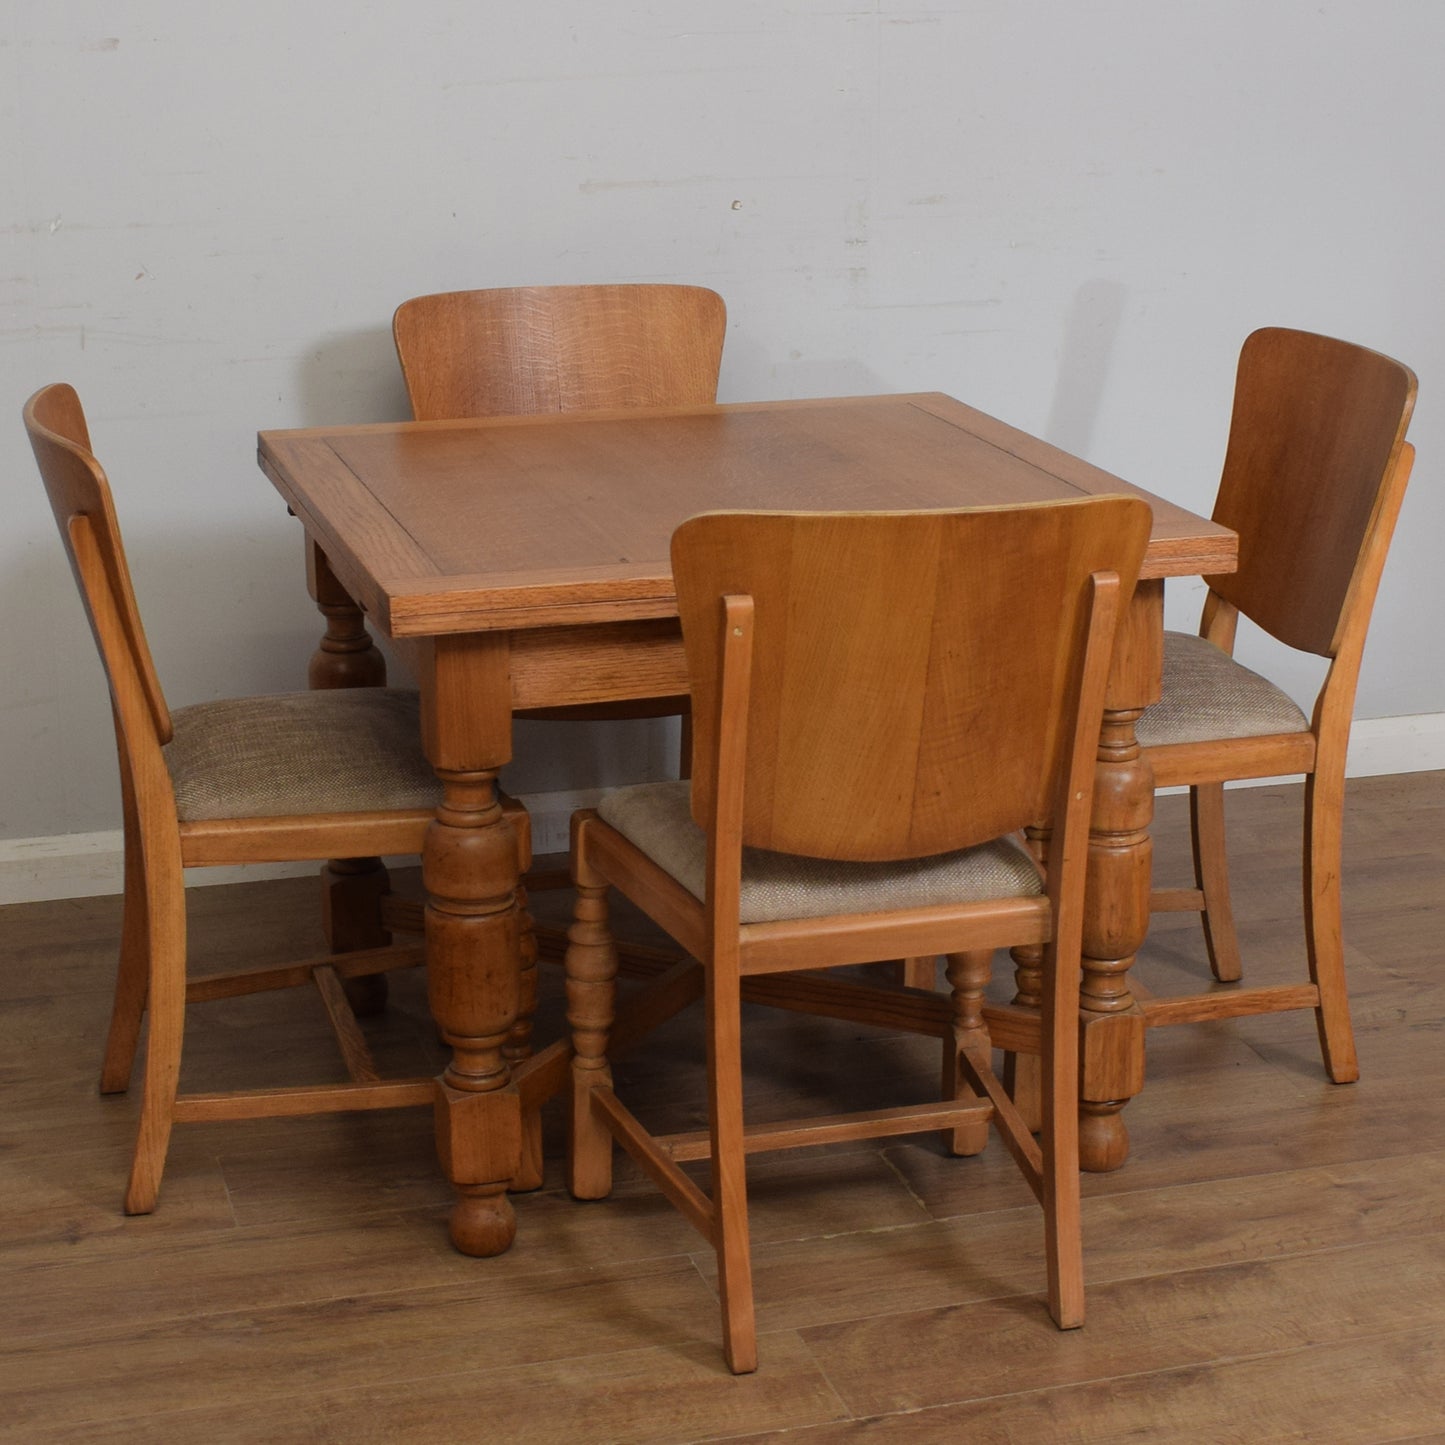 Restored Draw-Leaf Table And Four Chairs